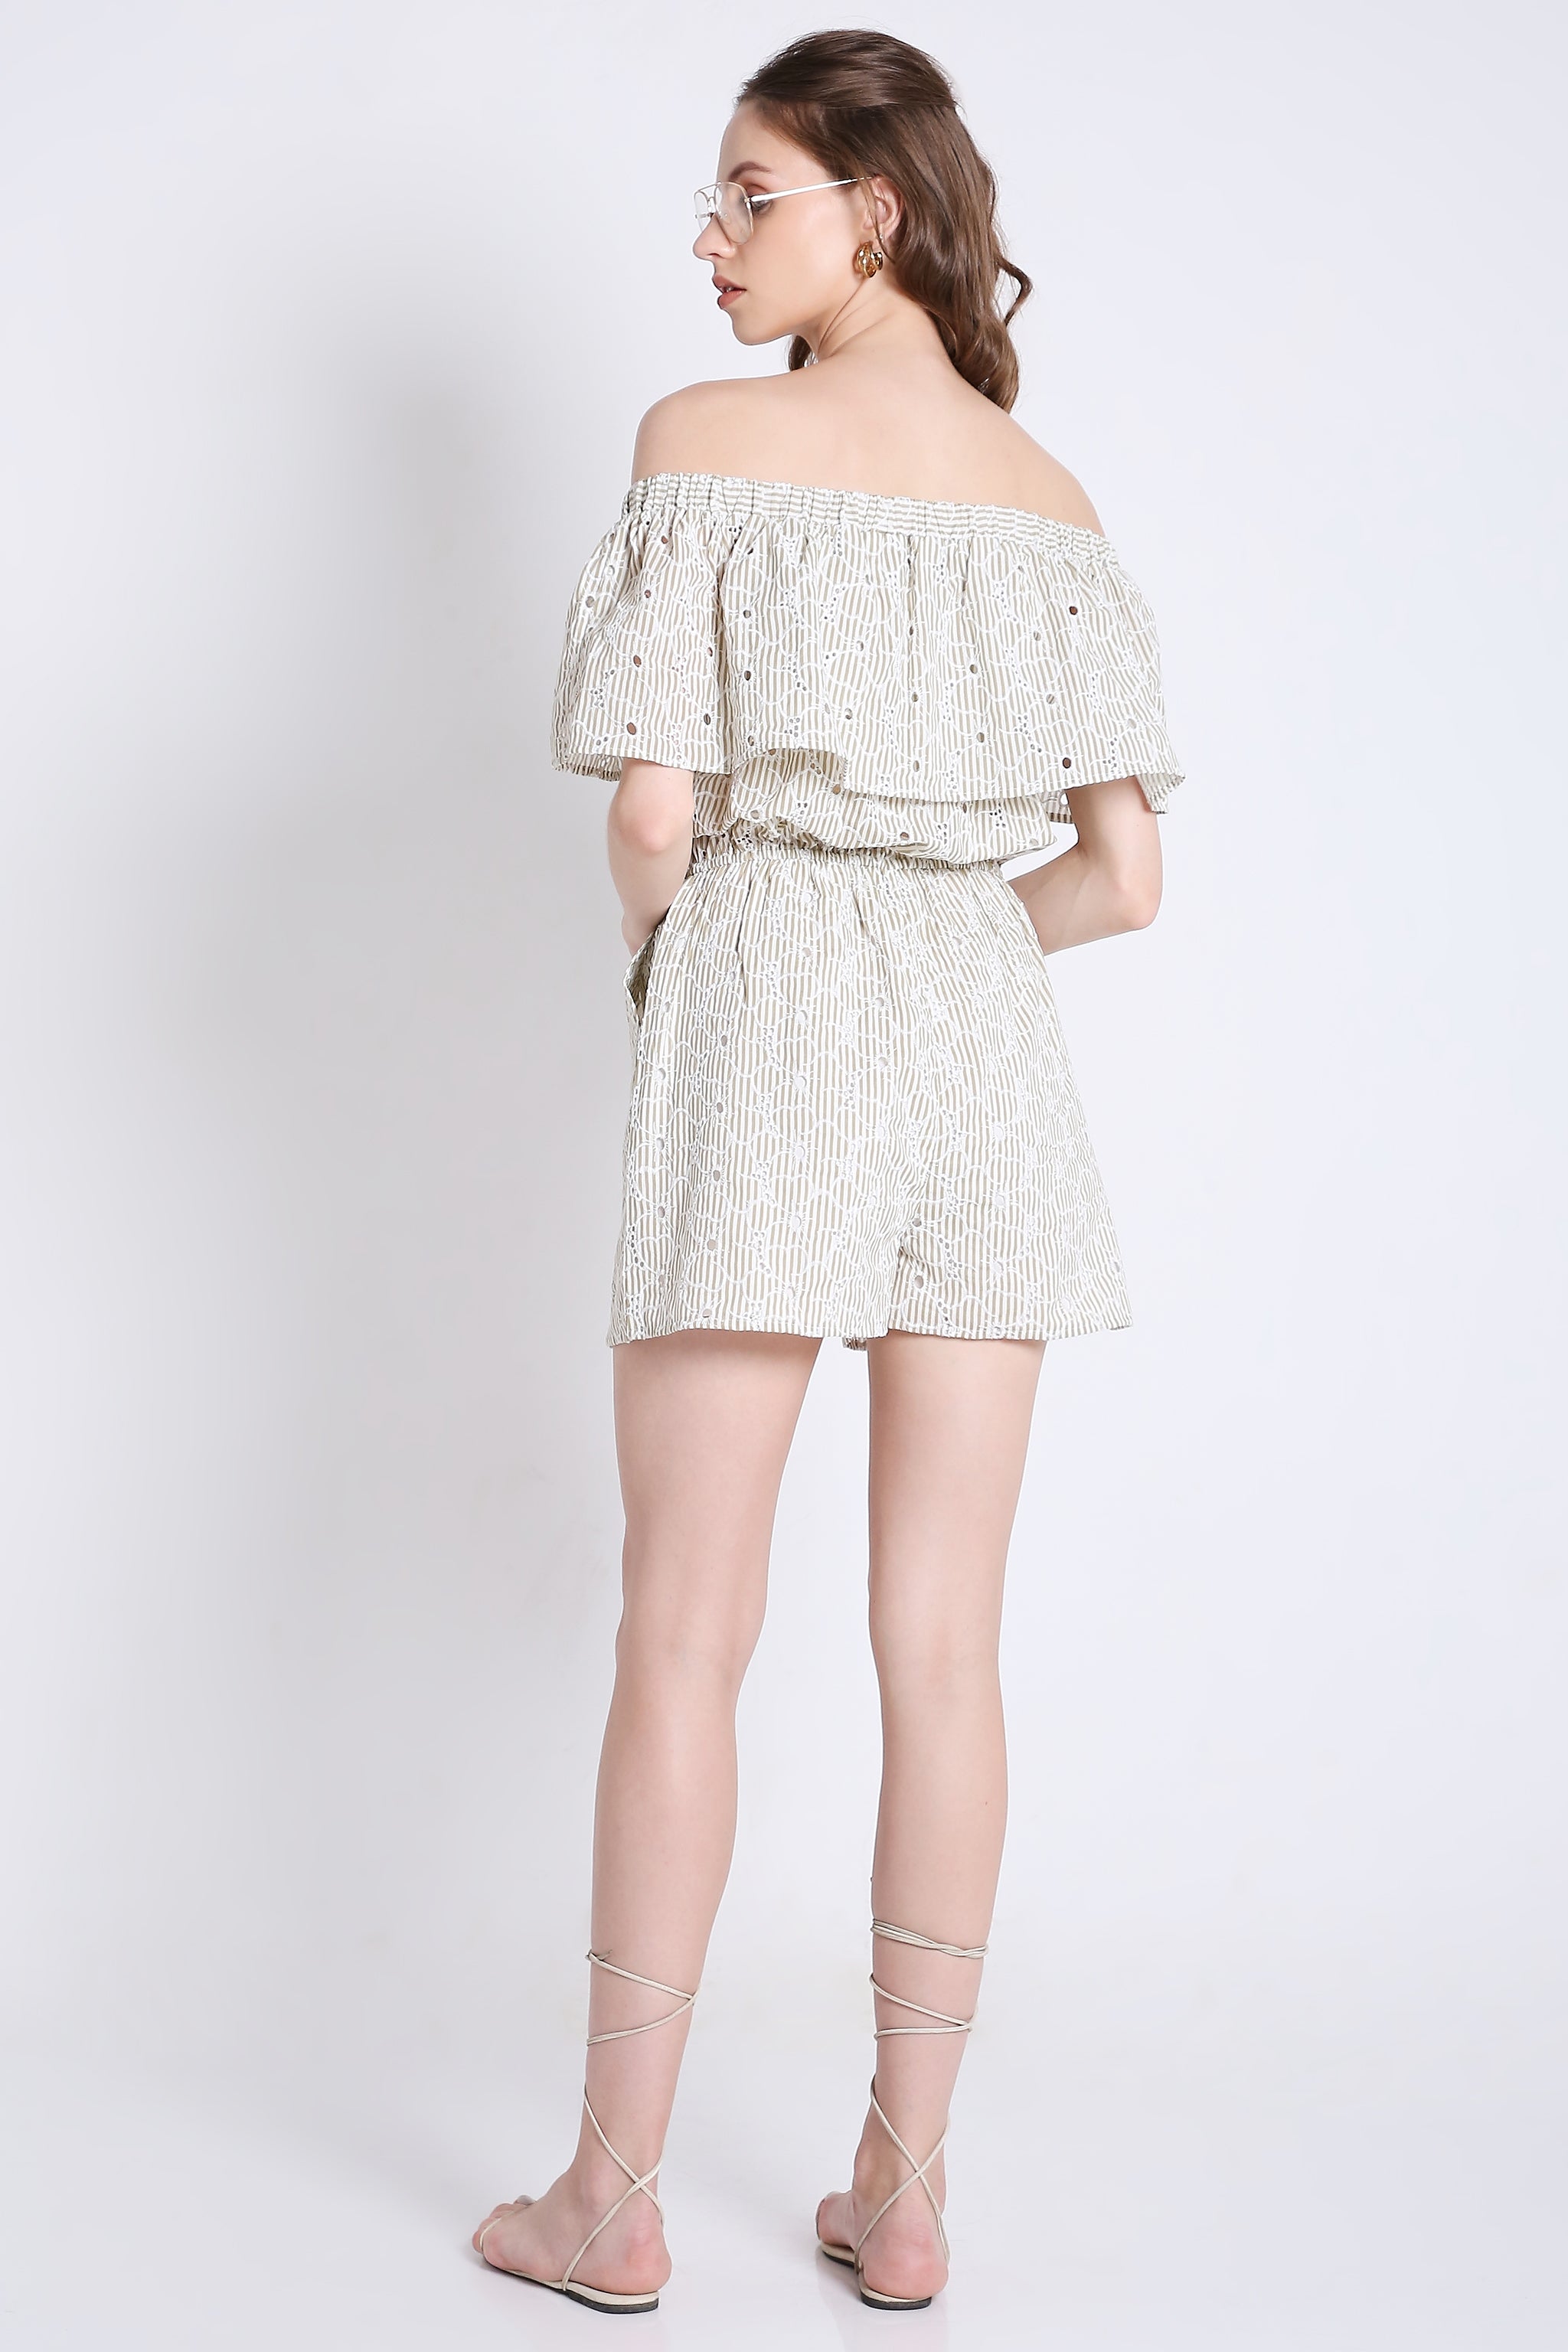 Off-Shoulder Playsuit with Stripes & Schiffli Embroidery Detail